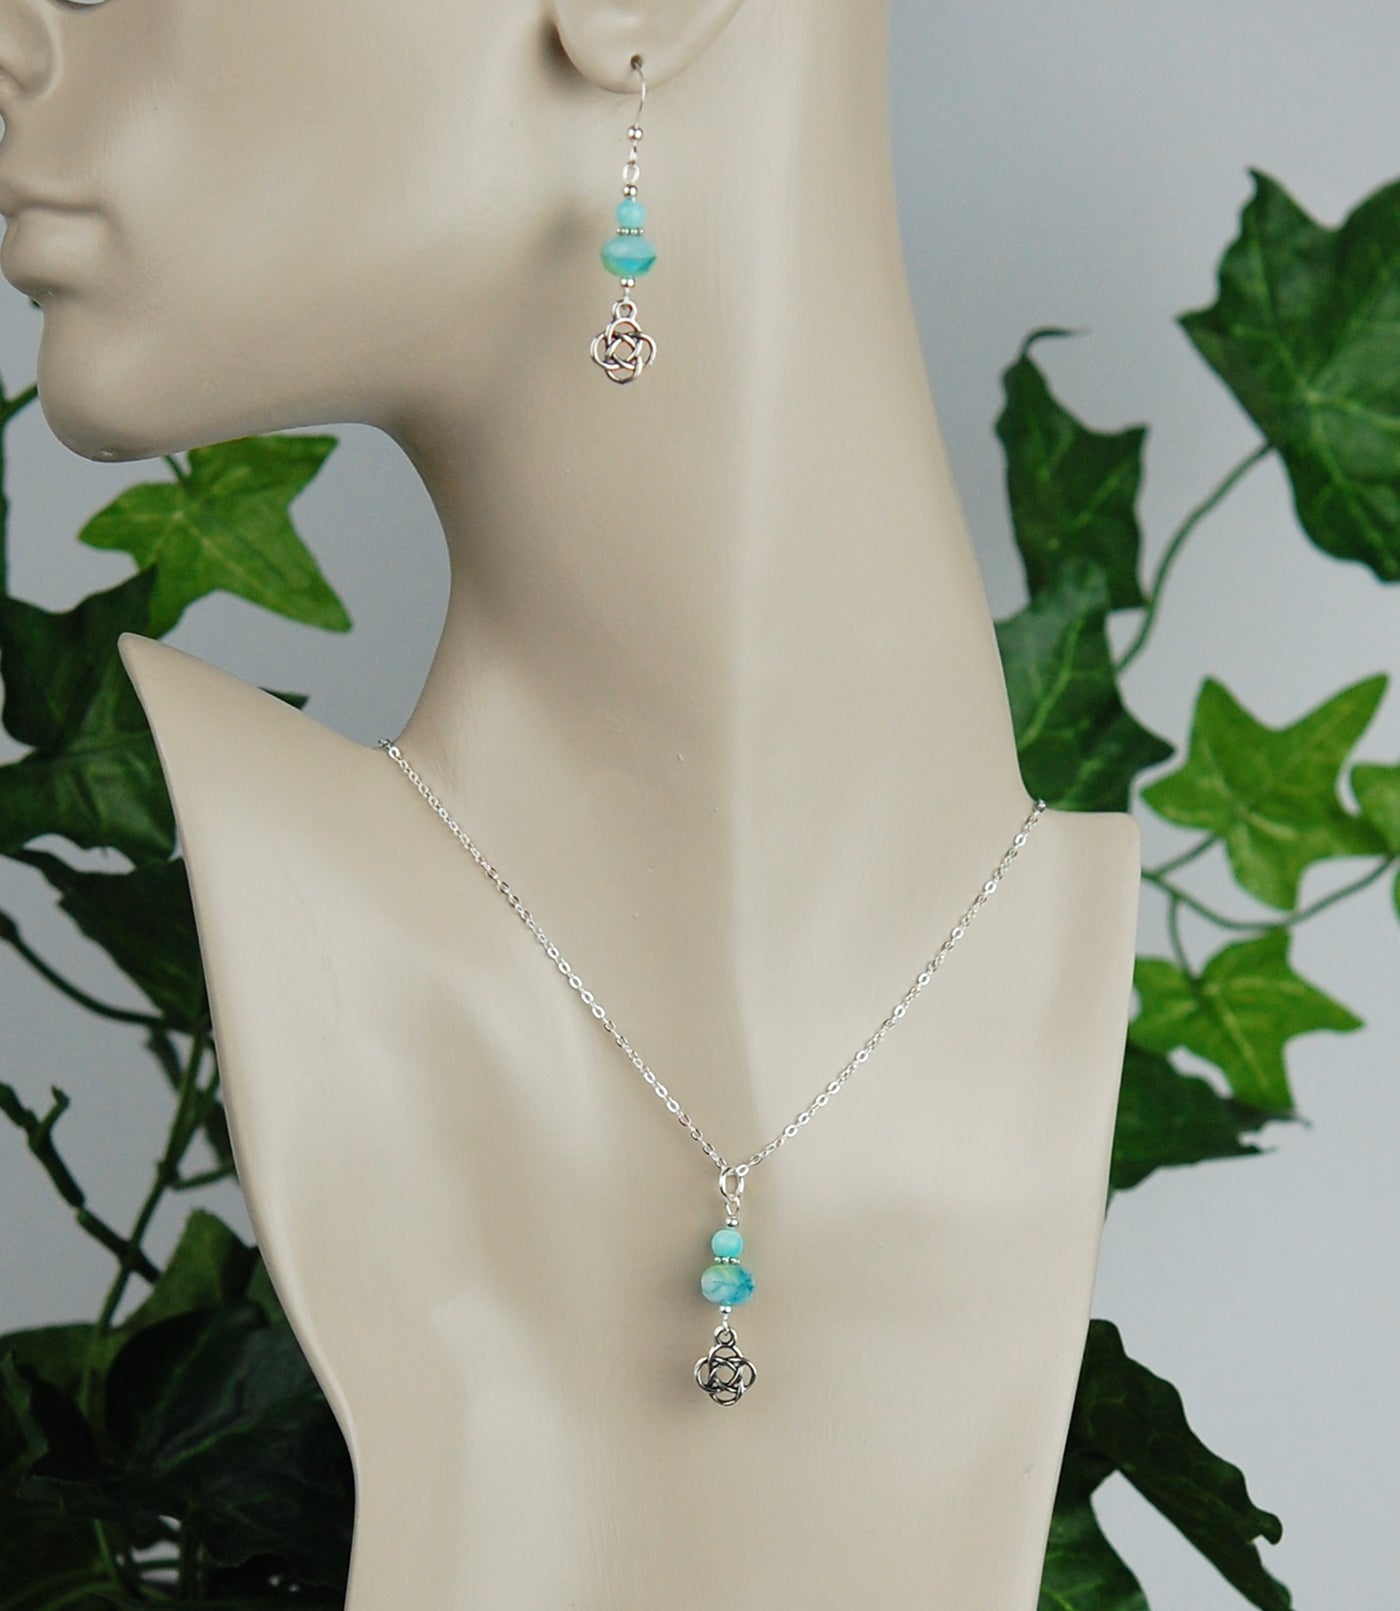 Amazonite and Rondelle Glass with Round Knot